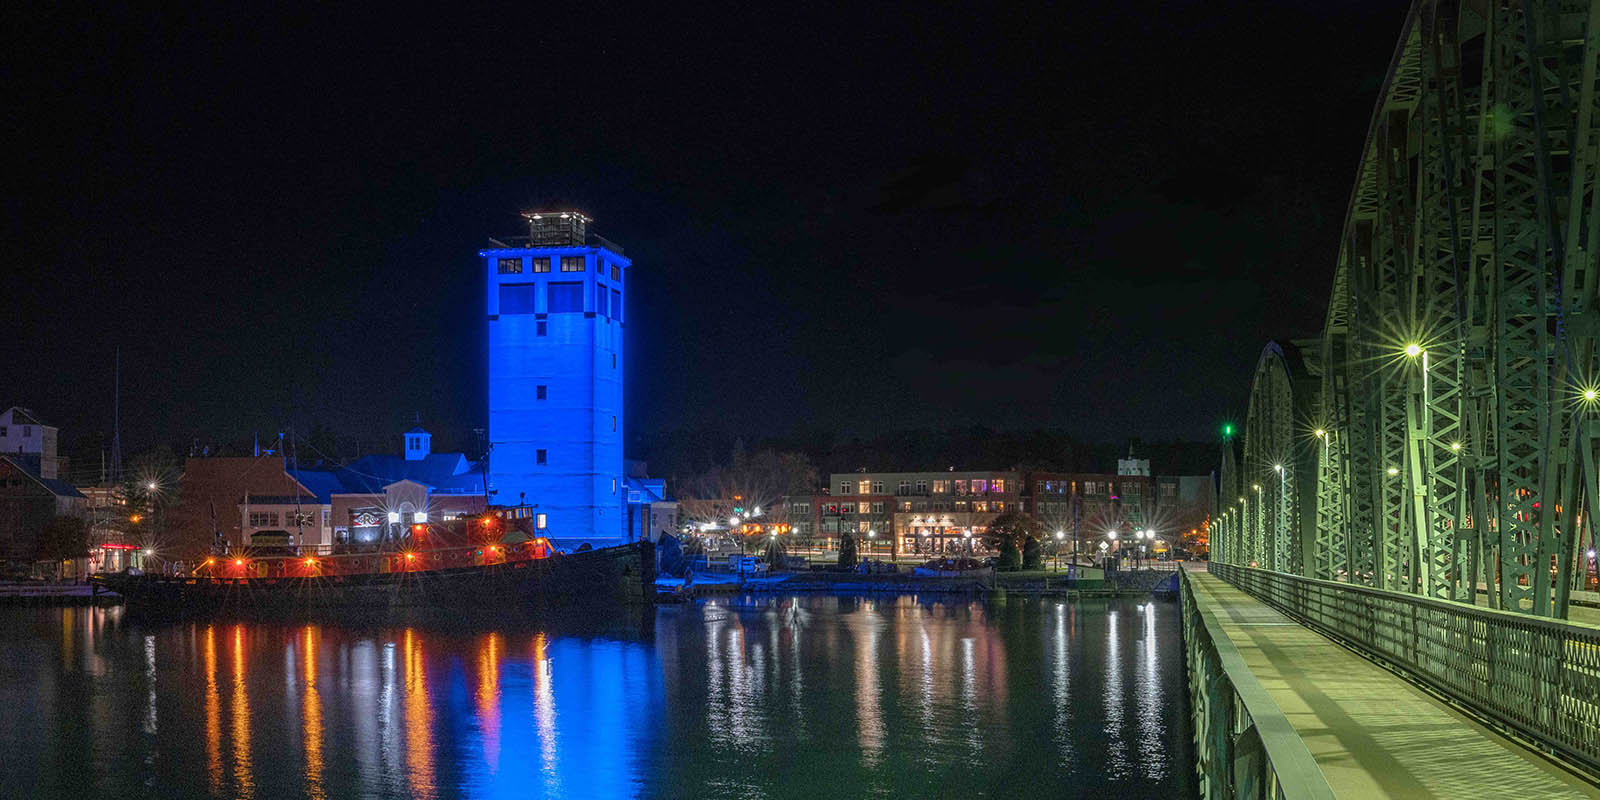 The 11 story tower with blue color-changing LED lights at the Door County Maritime Museum in Sturgeon Bay, WI